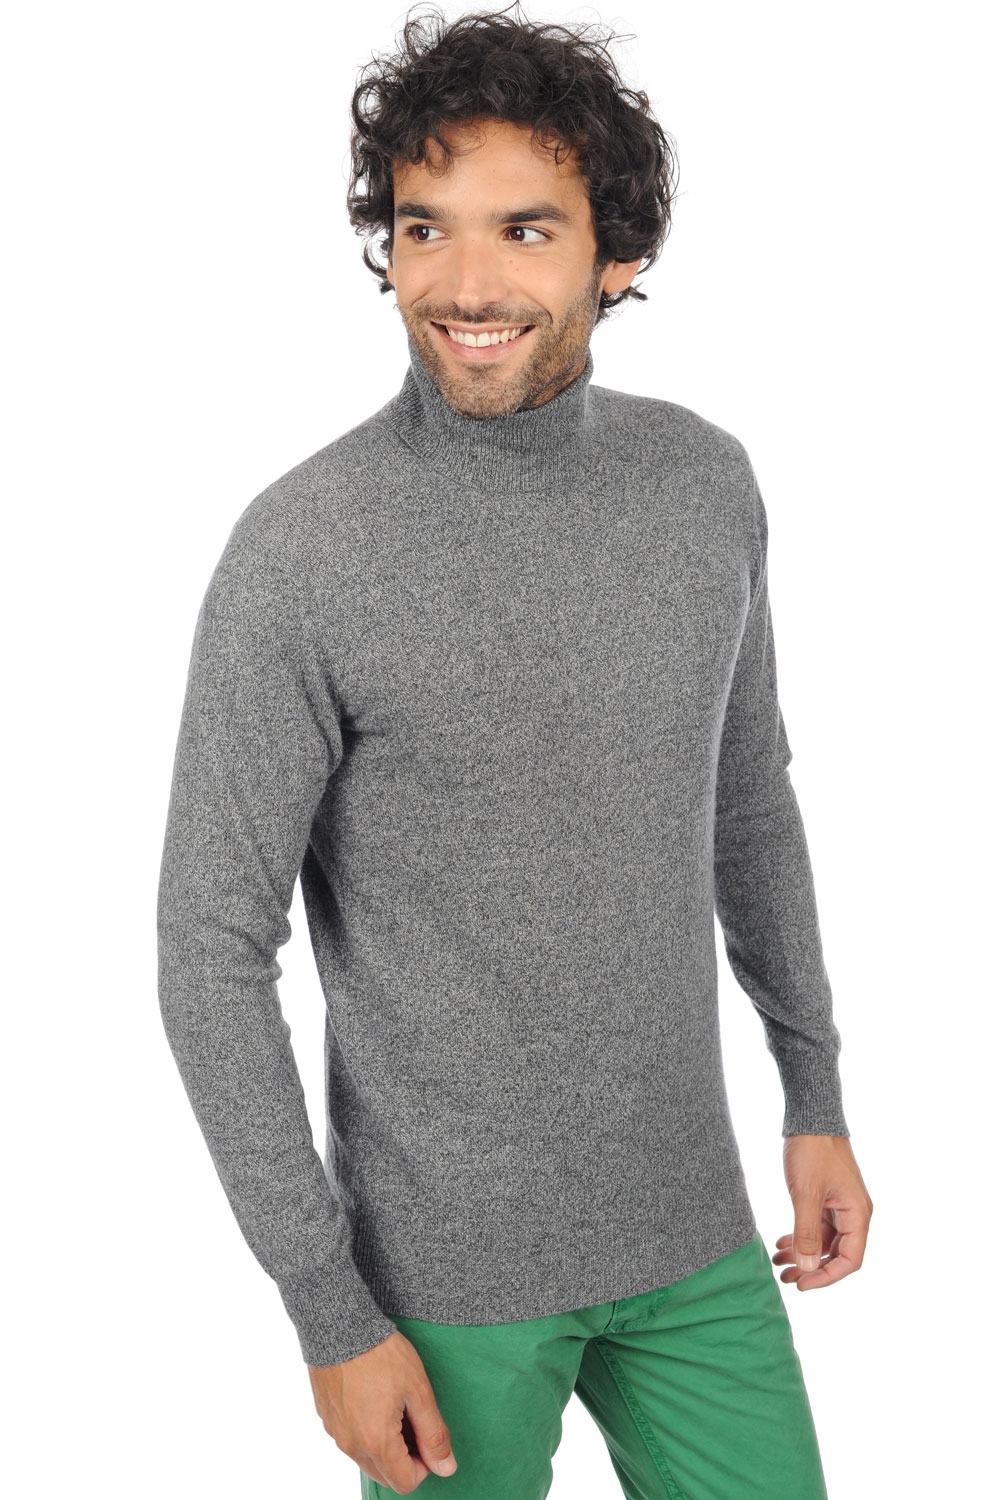 Cashmere men low prices tarry first silver grey m